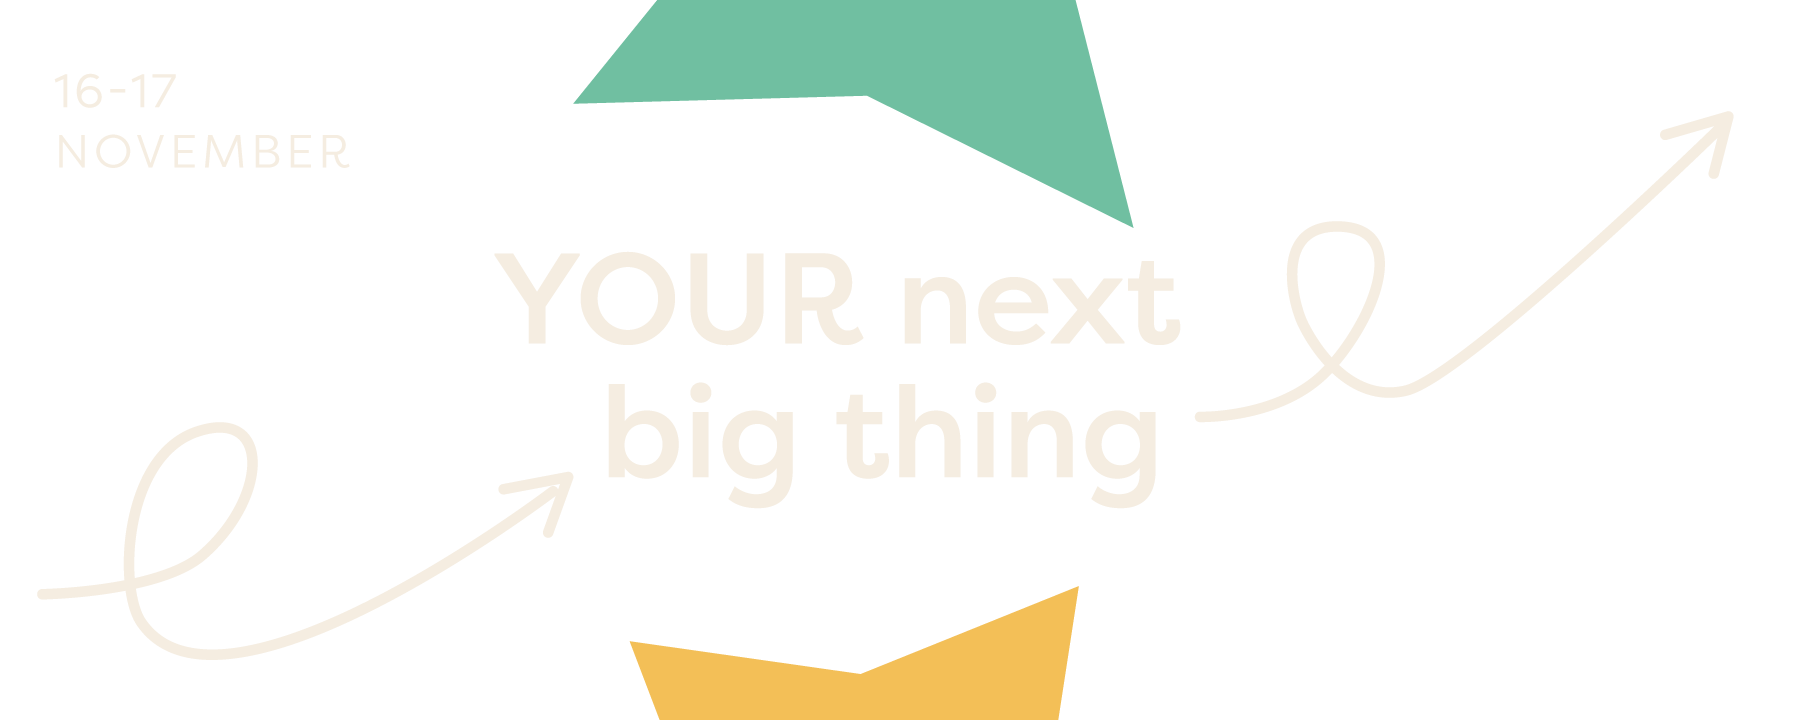 Your-next-big-thing